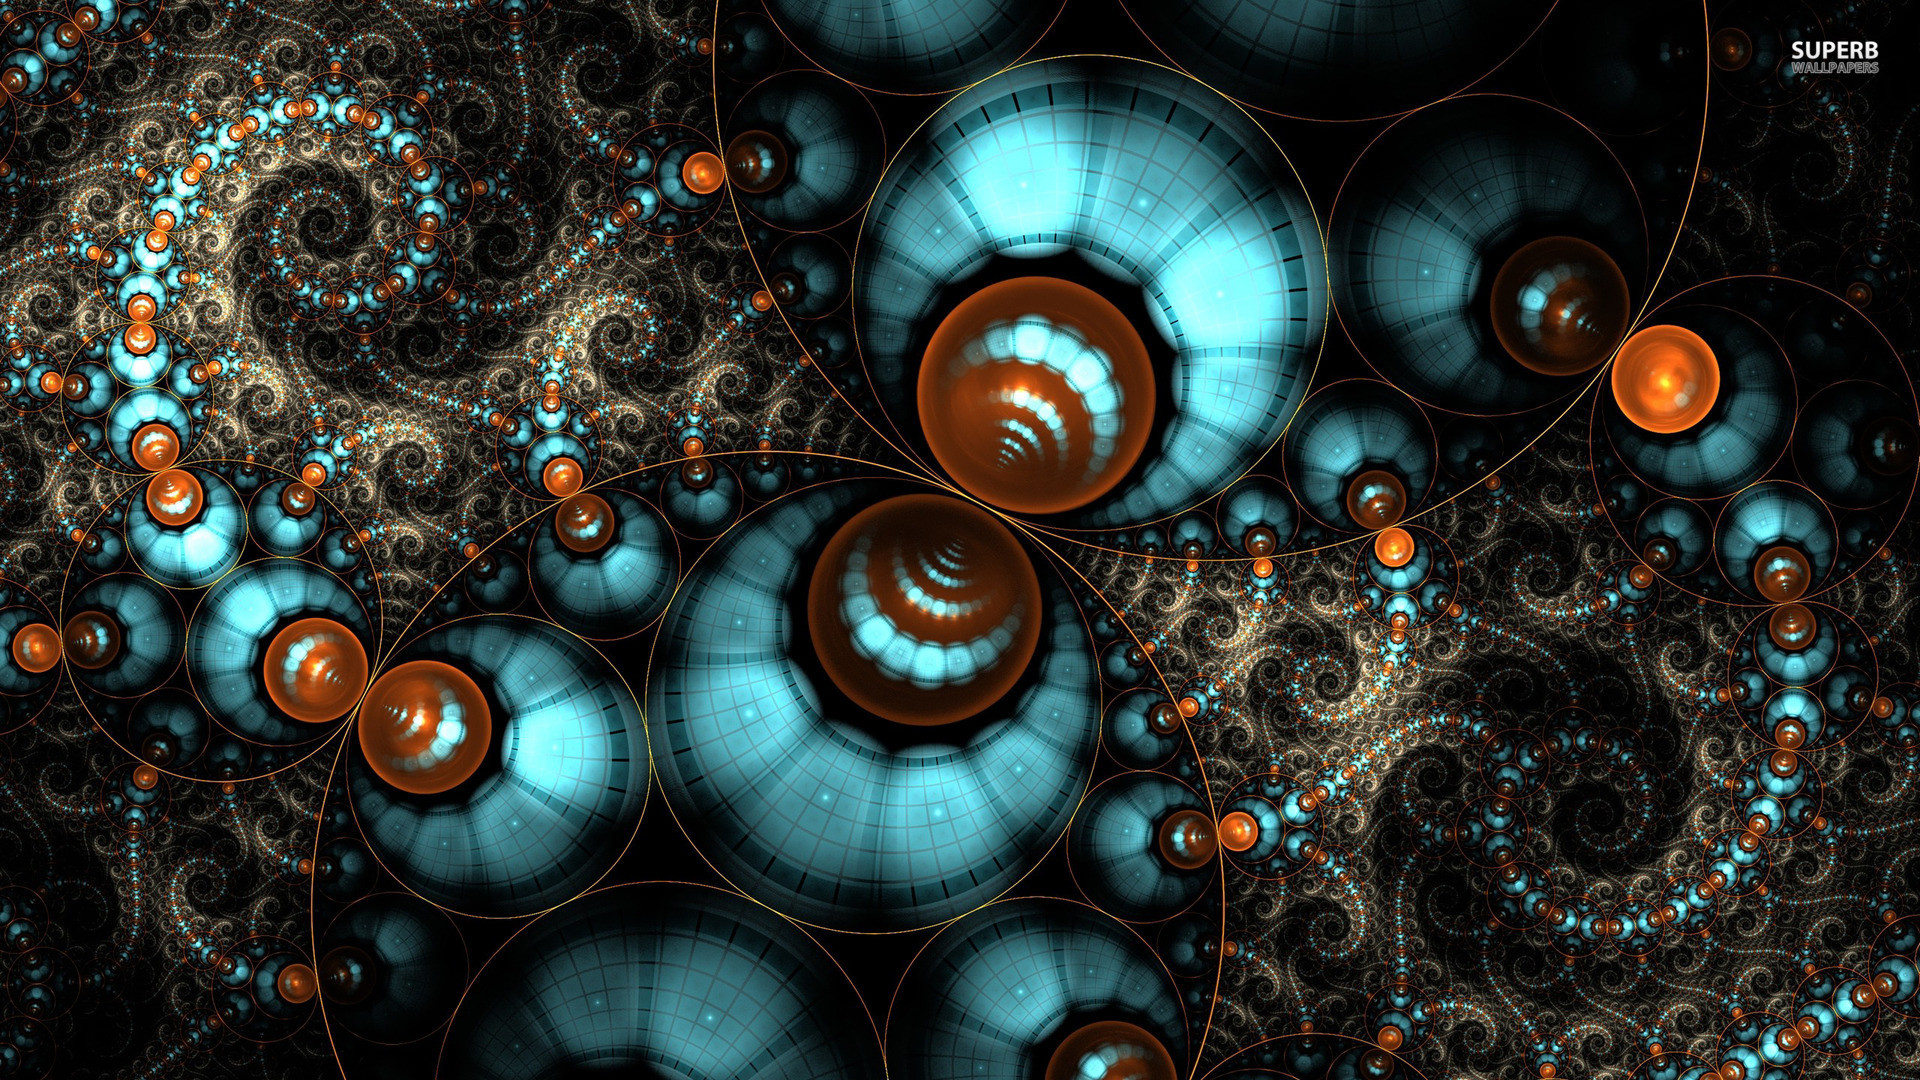 1920x1080 807057 Fractal Wallpapers | Abstract Backgrounds | feelgrafix.com |  Pinterest | Abstract backgrounds, Wallpaper and Fractals